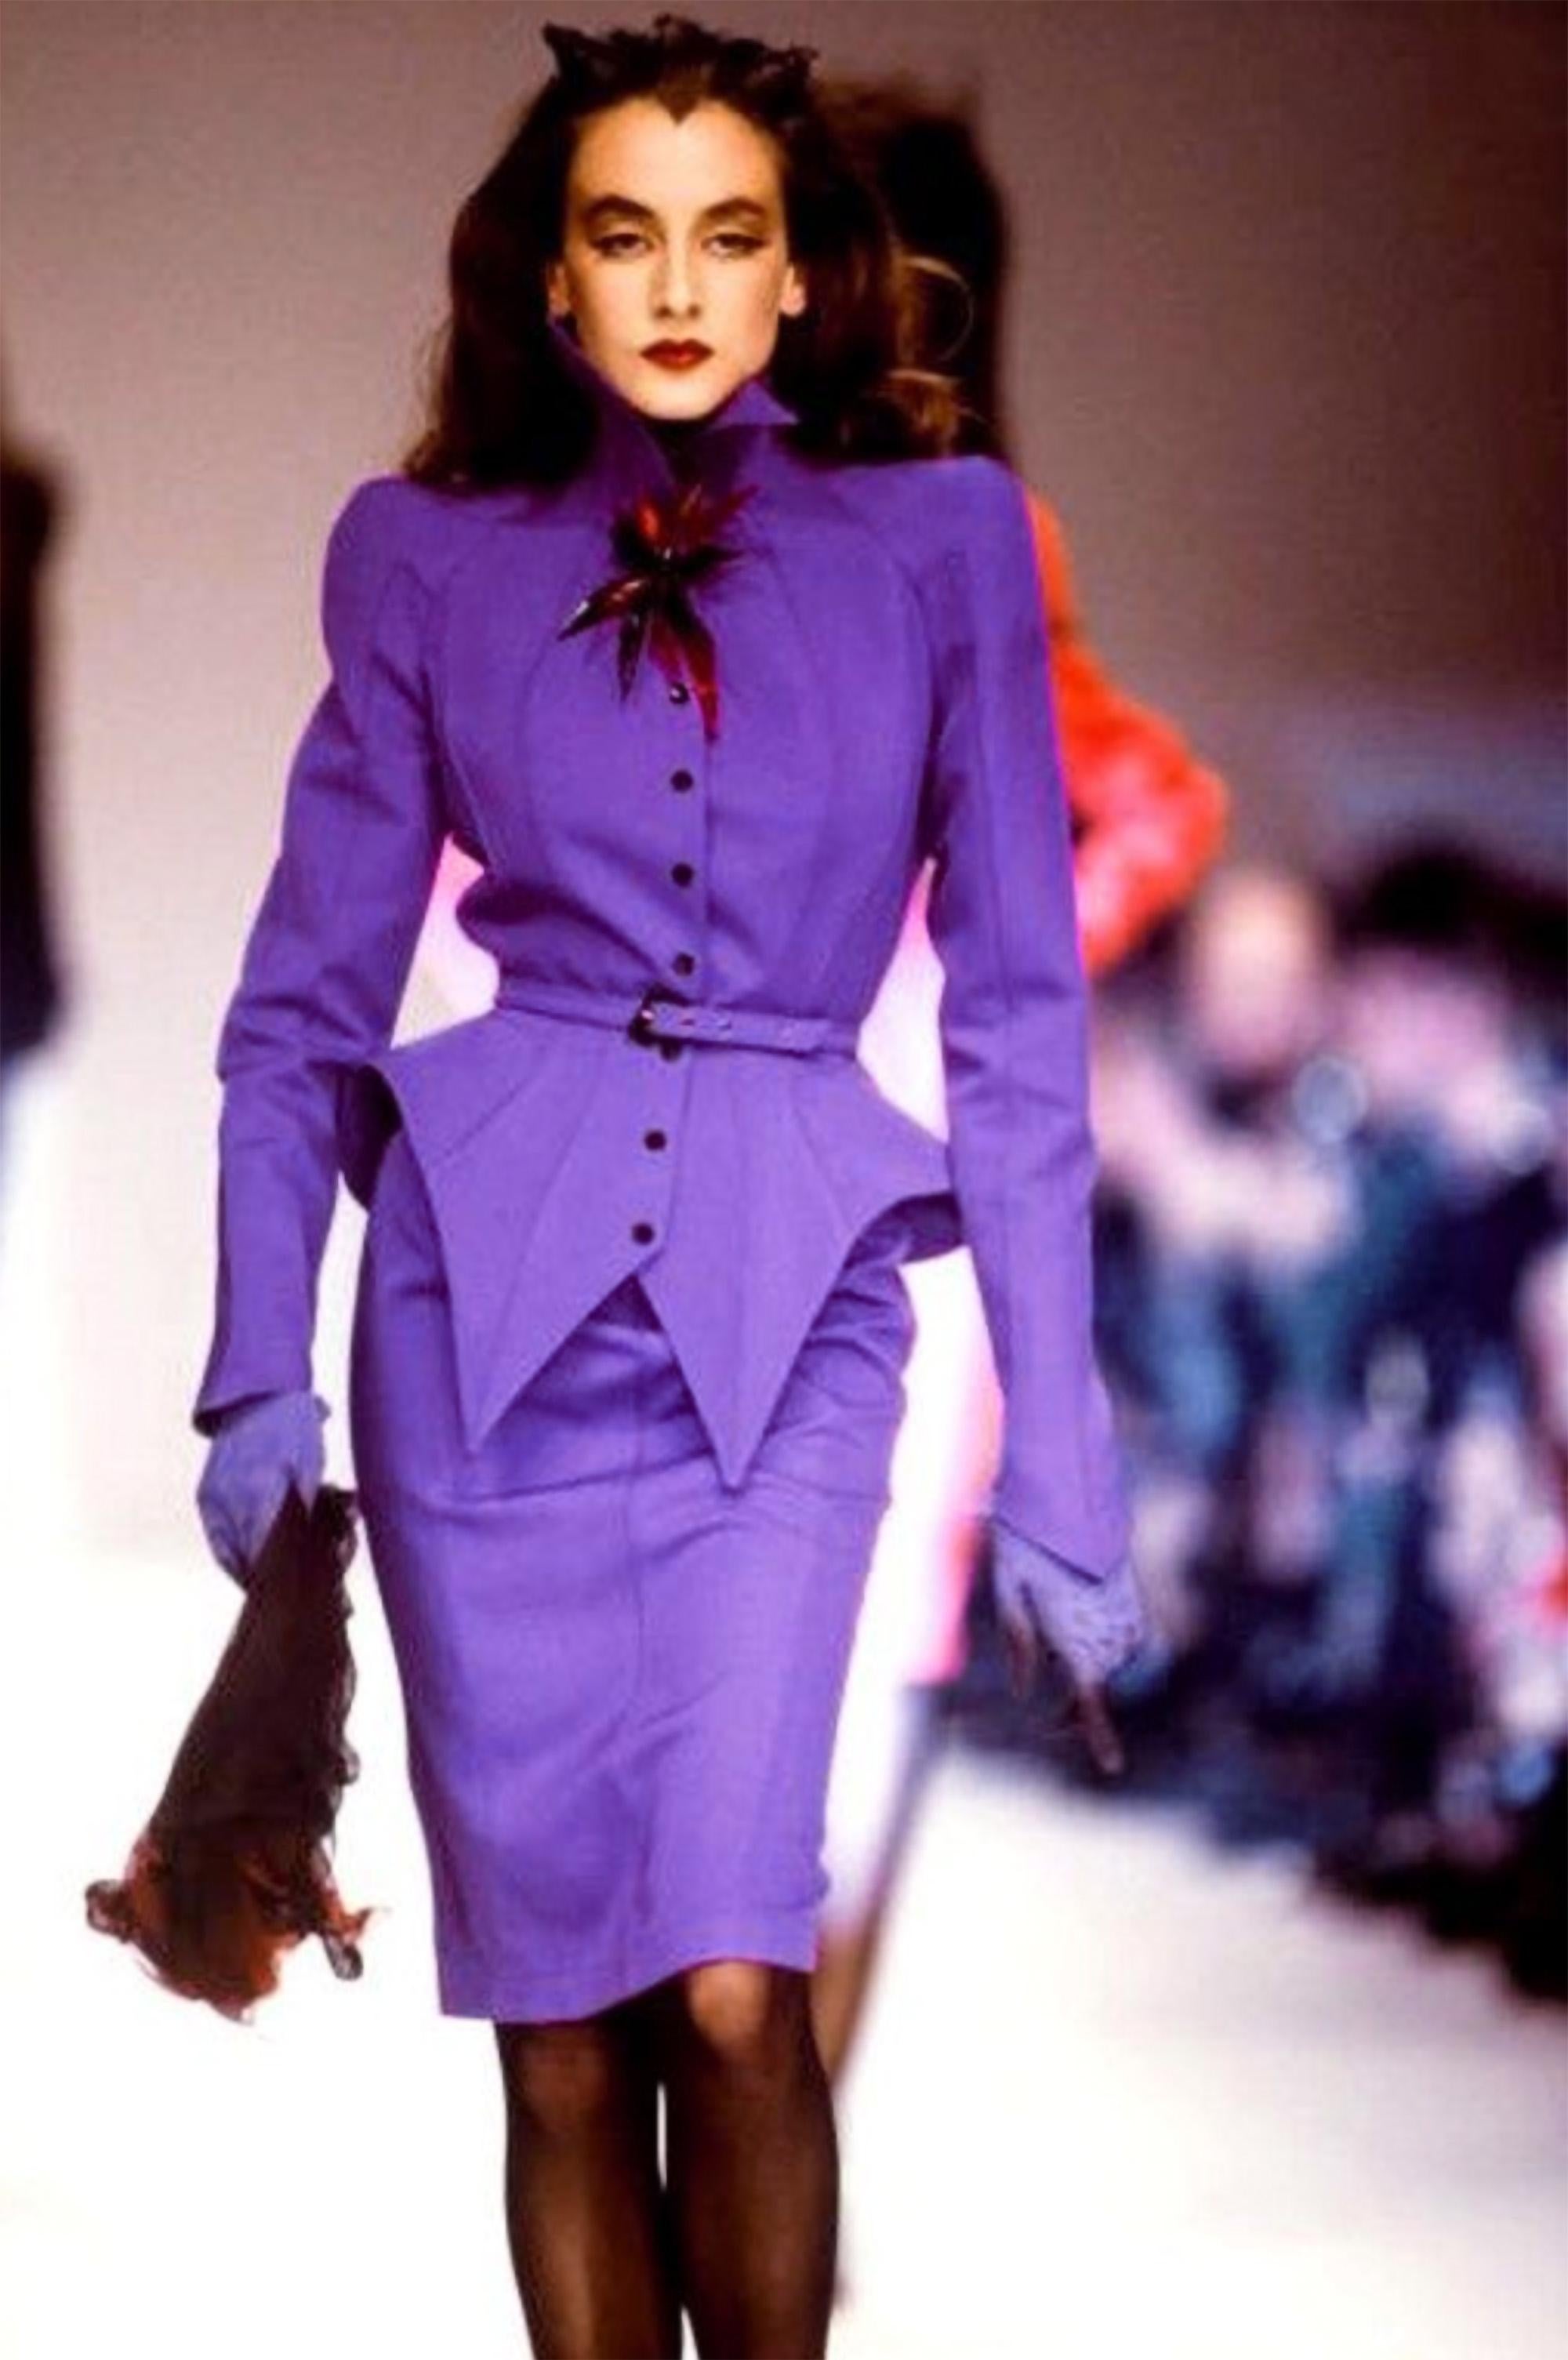 Museum worthy piece of Fashion History

The famous purple/violet skirt suit from the Thierry Mugler LES INFERNALES (She Devils) Collection FW 1988/ 1989. Two piece ensemble, jacket and skirt.
Fantatsic oconic Thierry Mugler Signature Piece!
Very